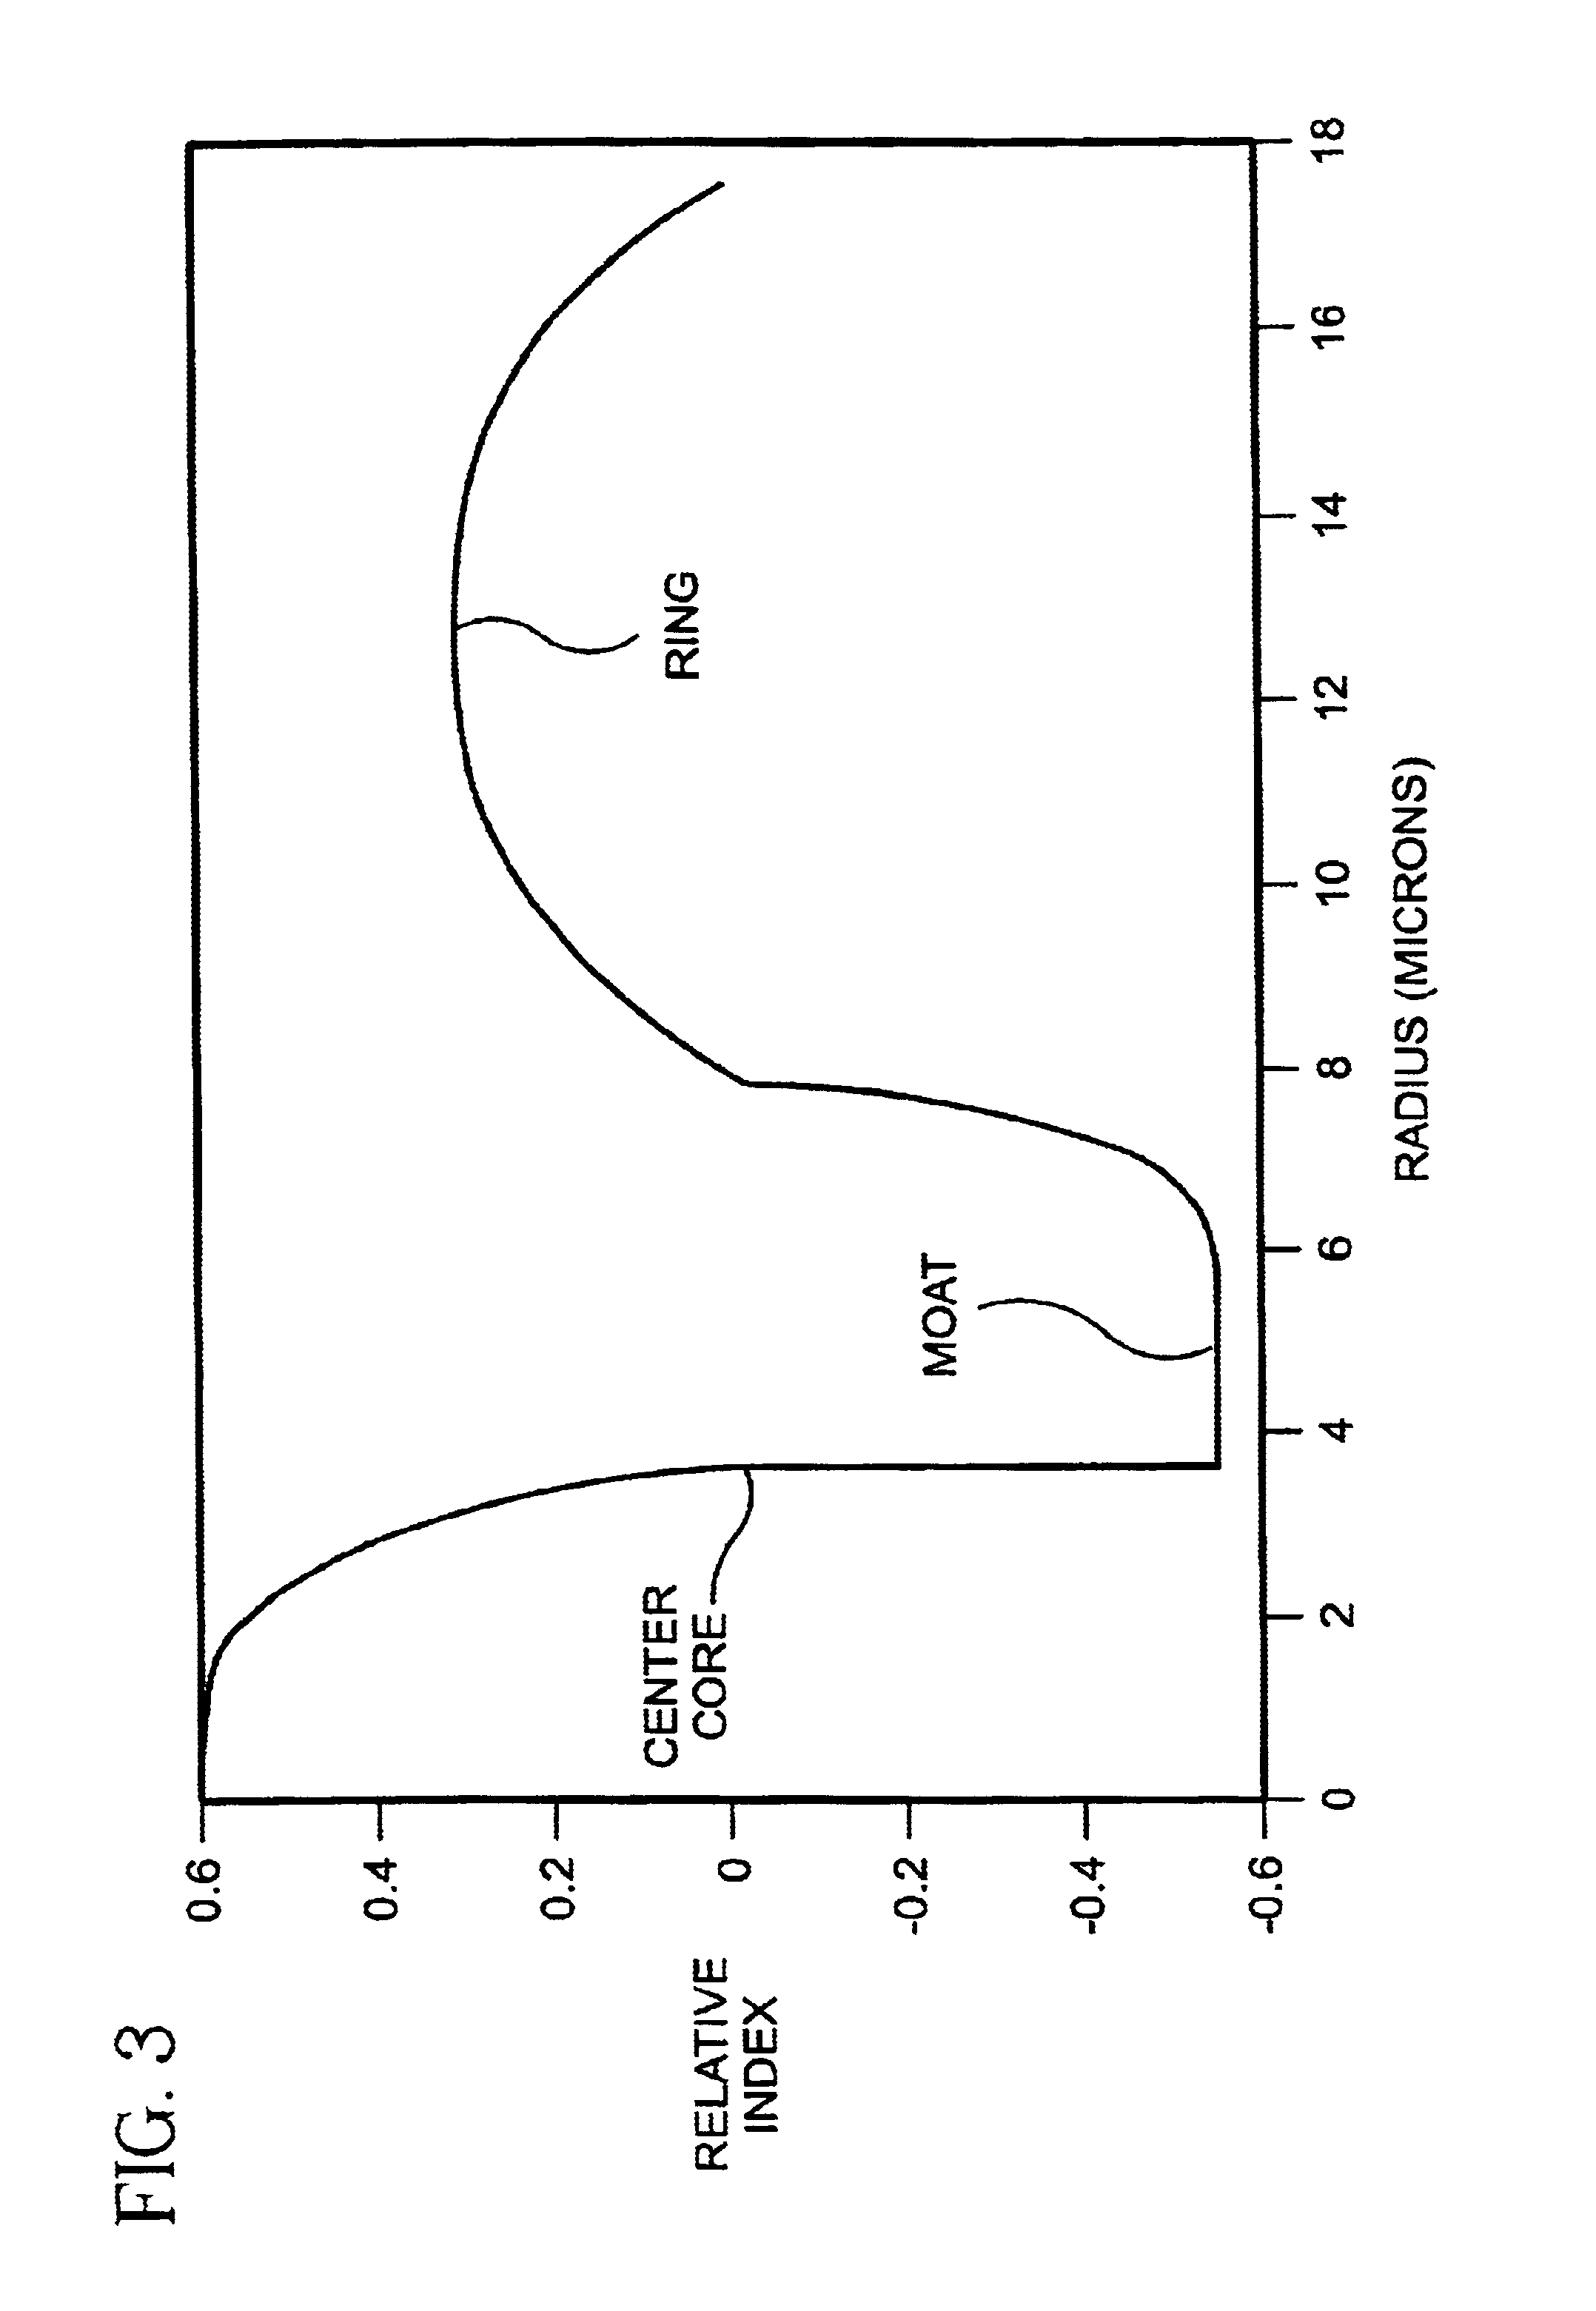 Fiber profile for achieving very high dispersion slope